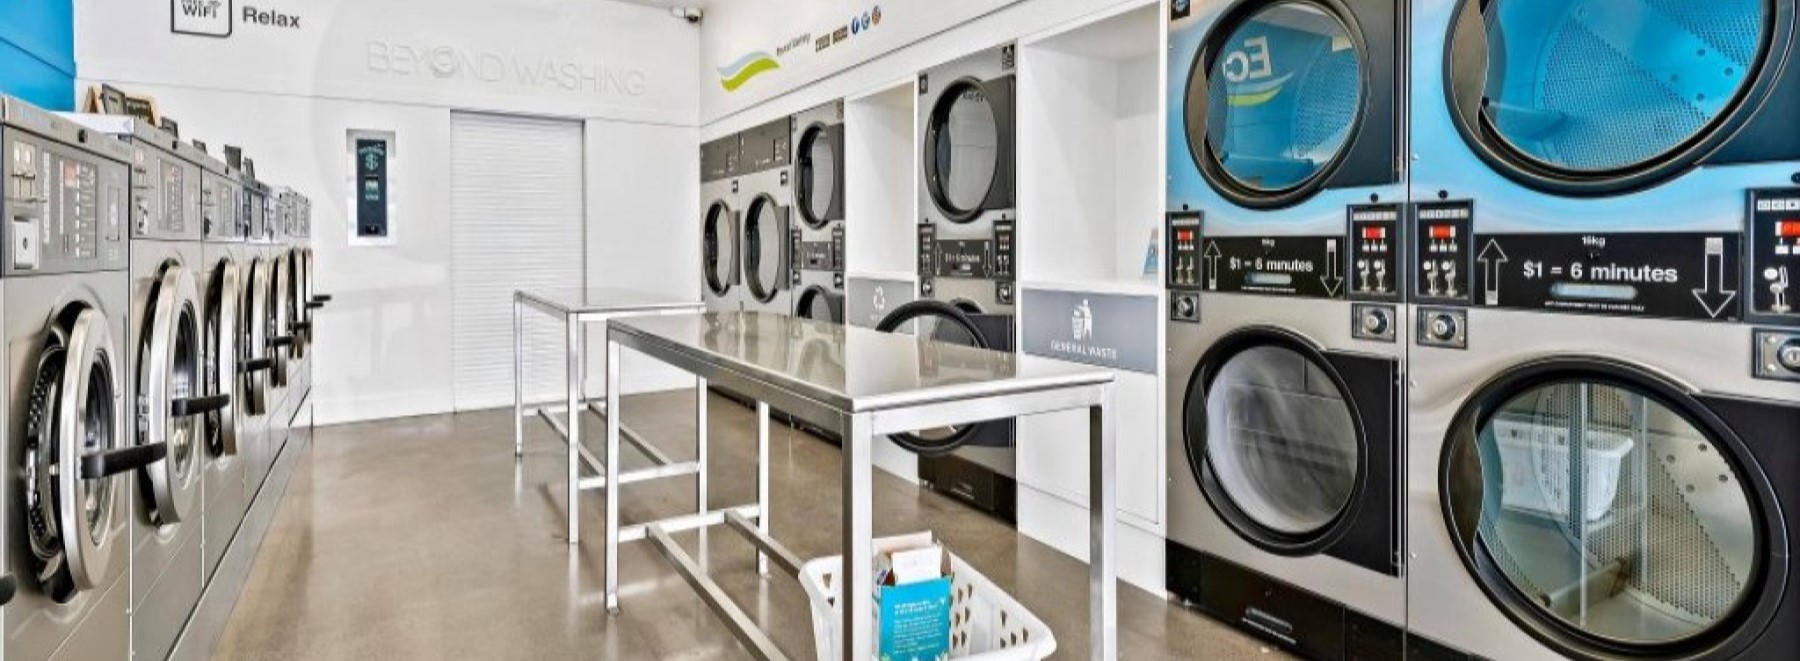 Eco Laundry Room in Melrose Street Shops